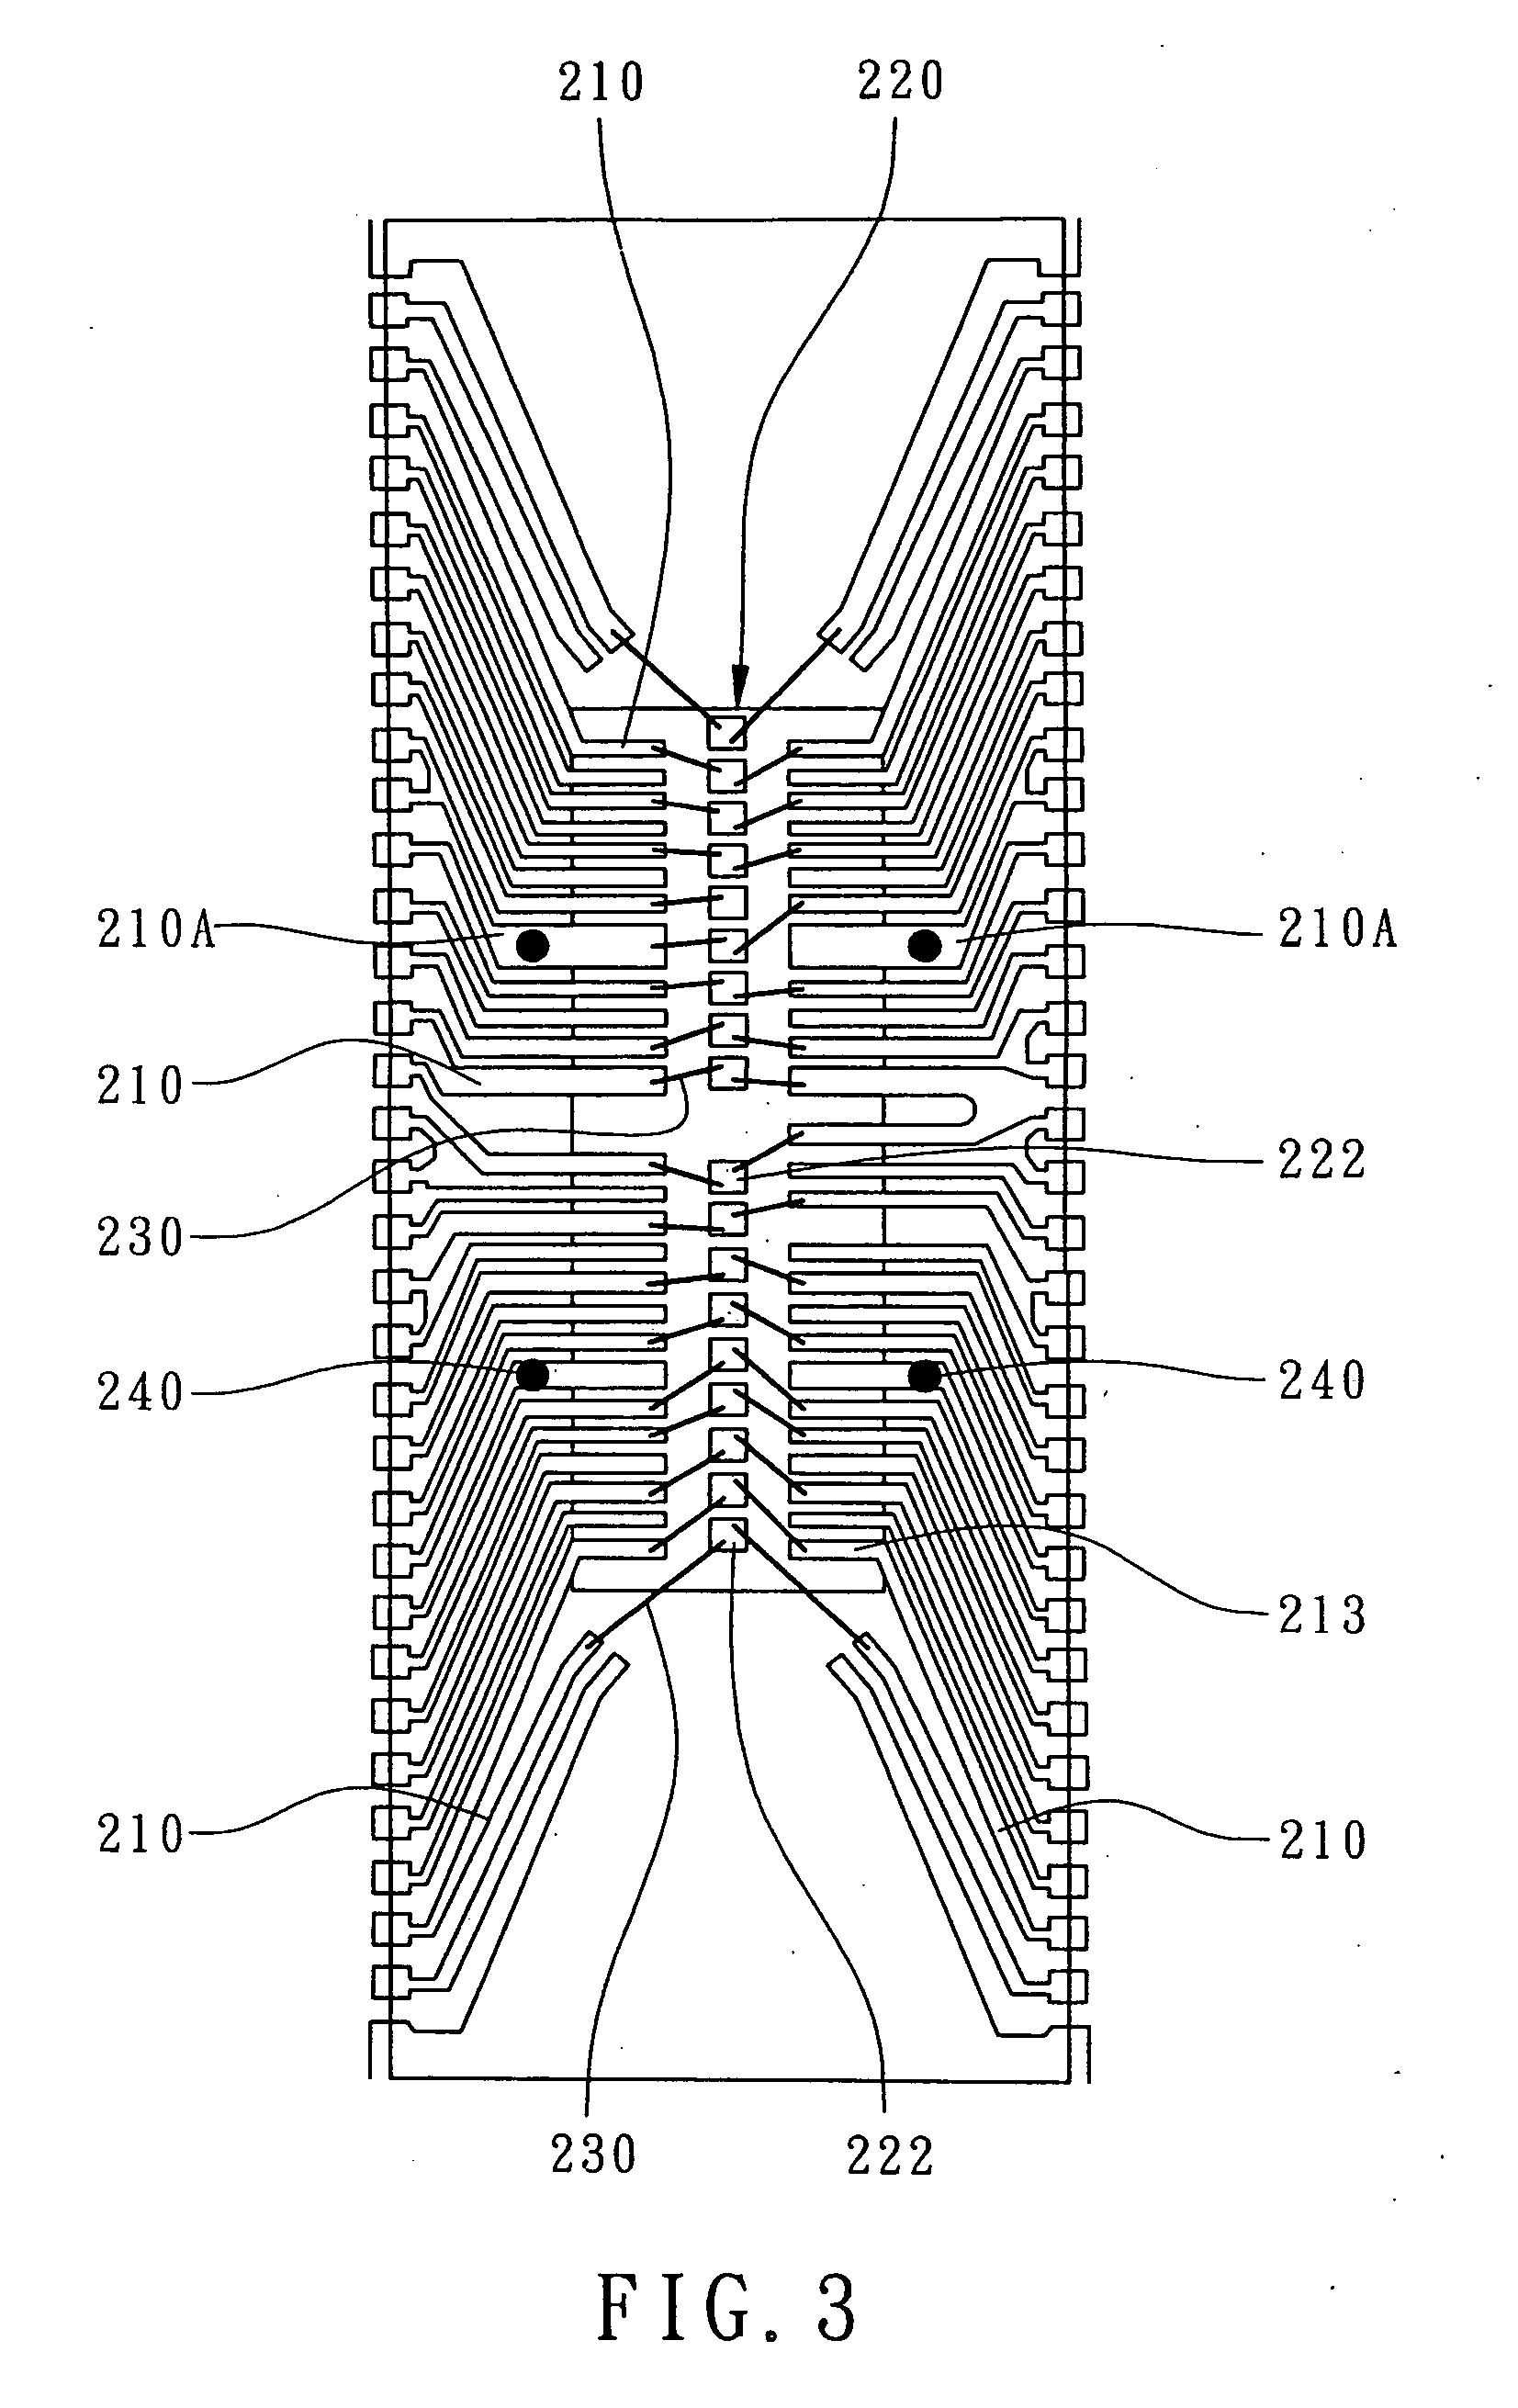 IC package keeping attachment level of leads on chip during molding process